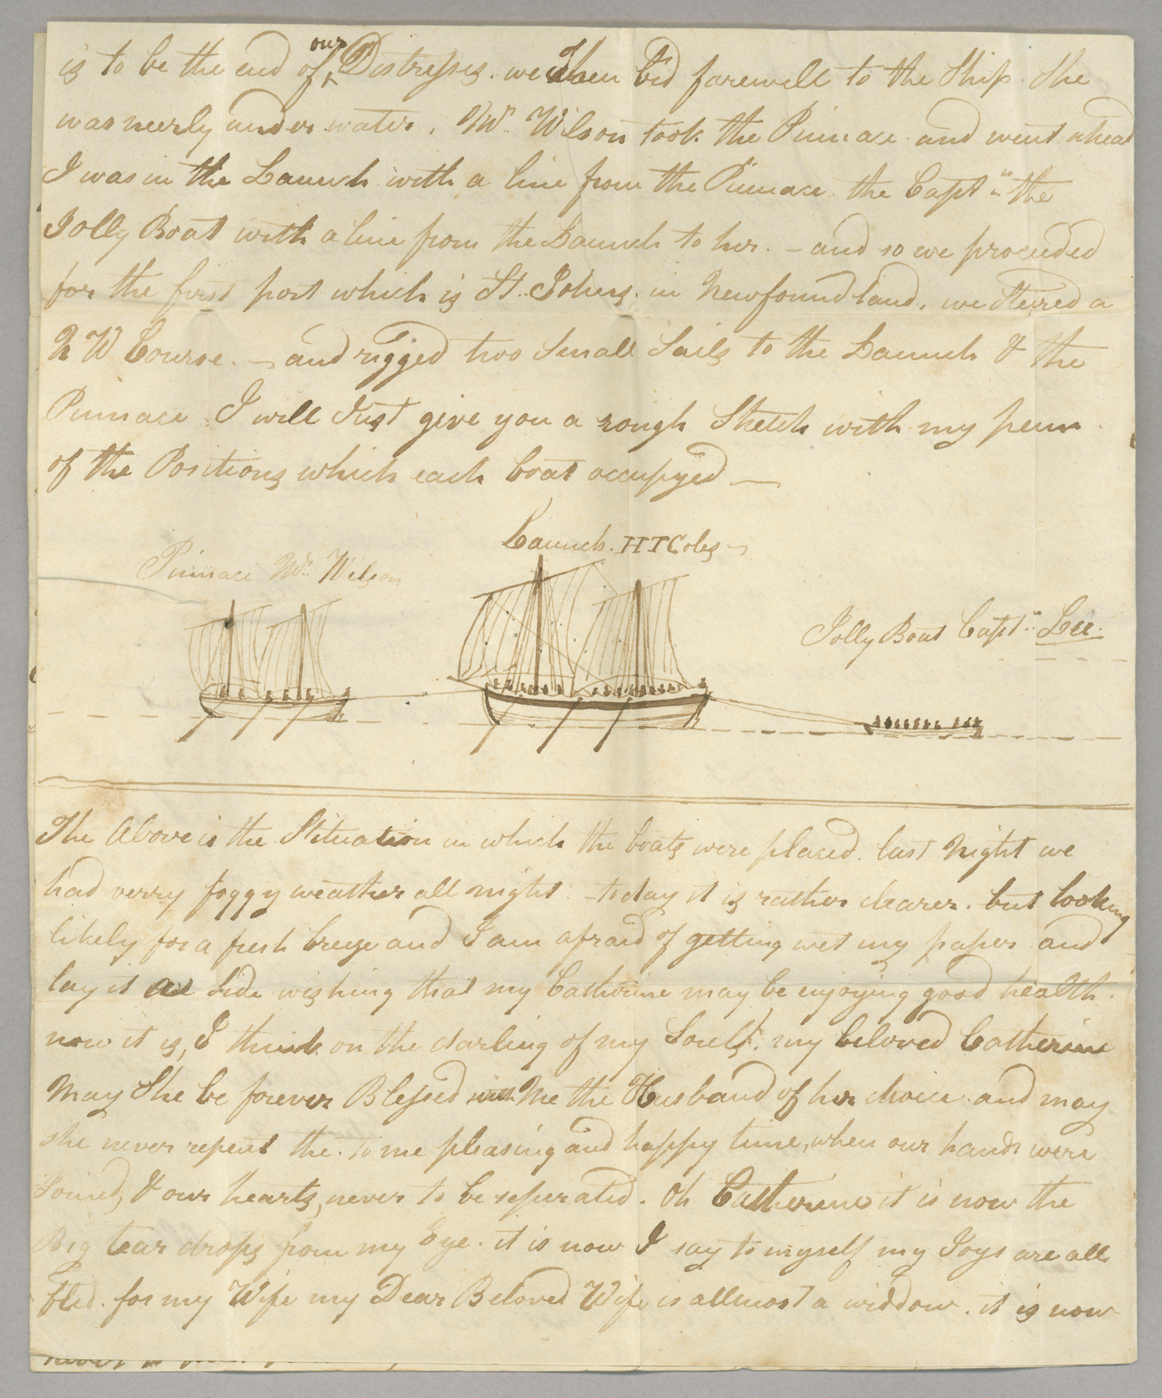 Letter, [Hewlett Townsend Coles], "Ship Liverpool's Boats towards St. Johns," to [Catherine Van Suydam Coles], n.p., Page 4